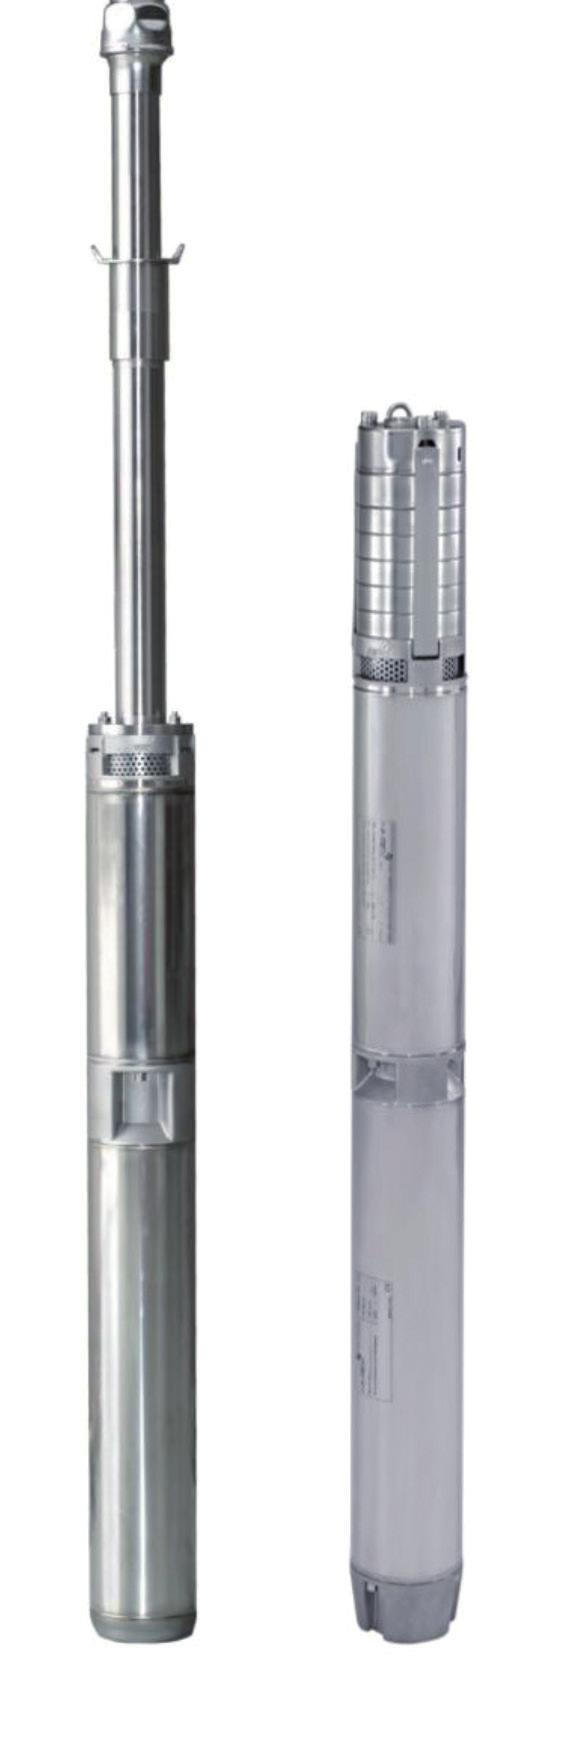 4HS MultiPower Submersible Pumps.